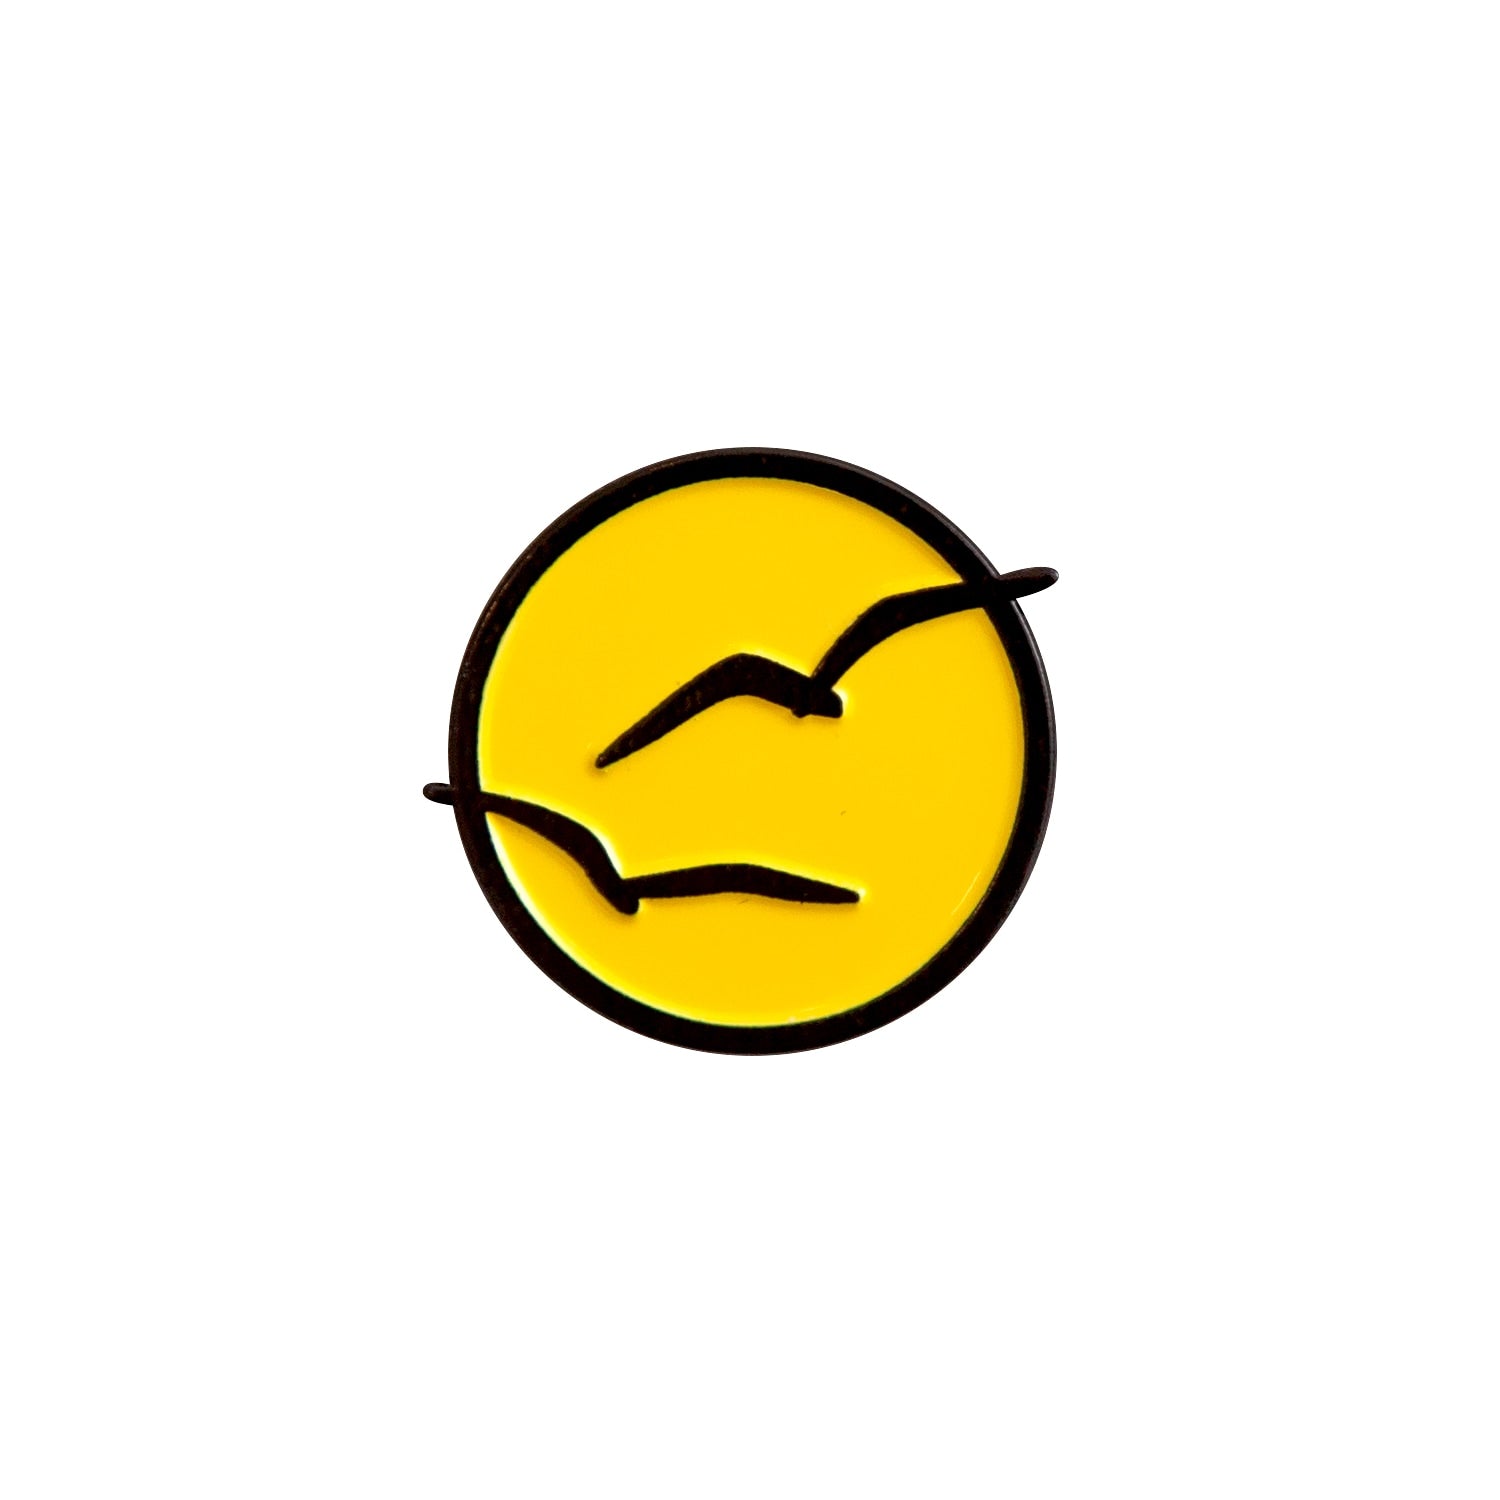 Sun Birds Enamel Pin in yellow and black on a white background - Free & Easy